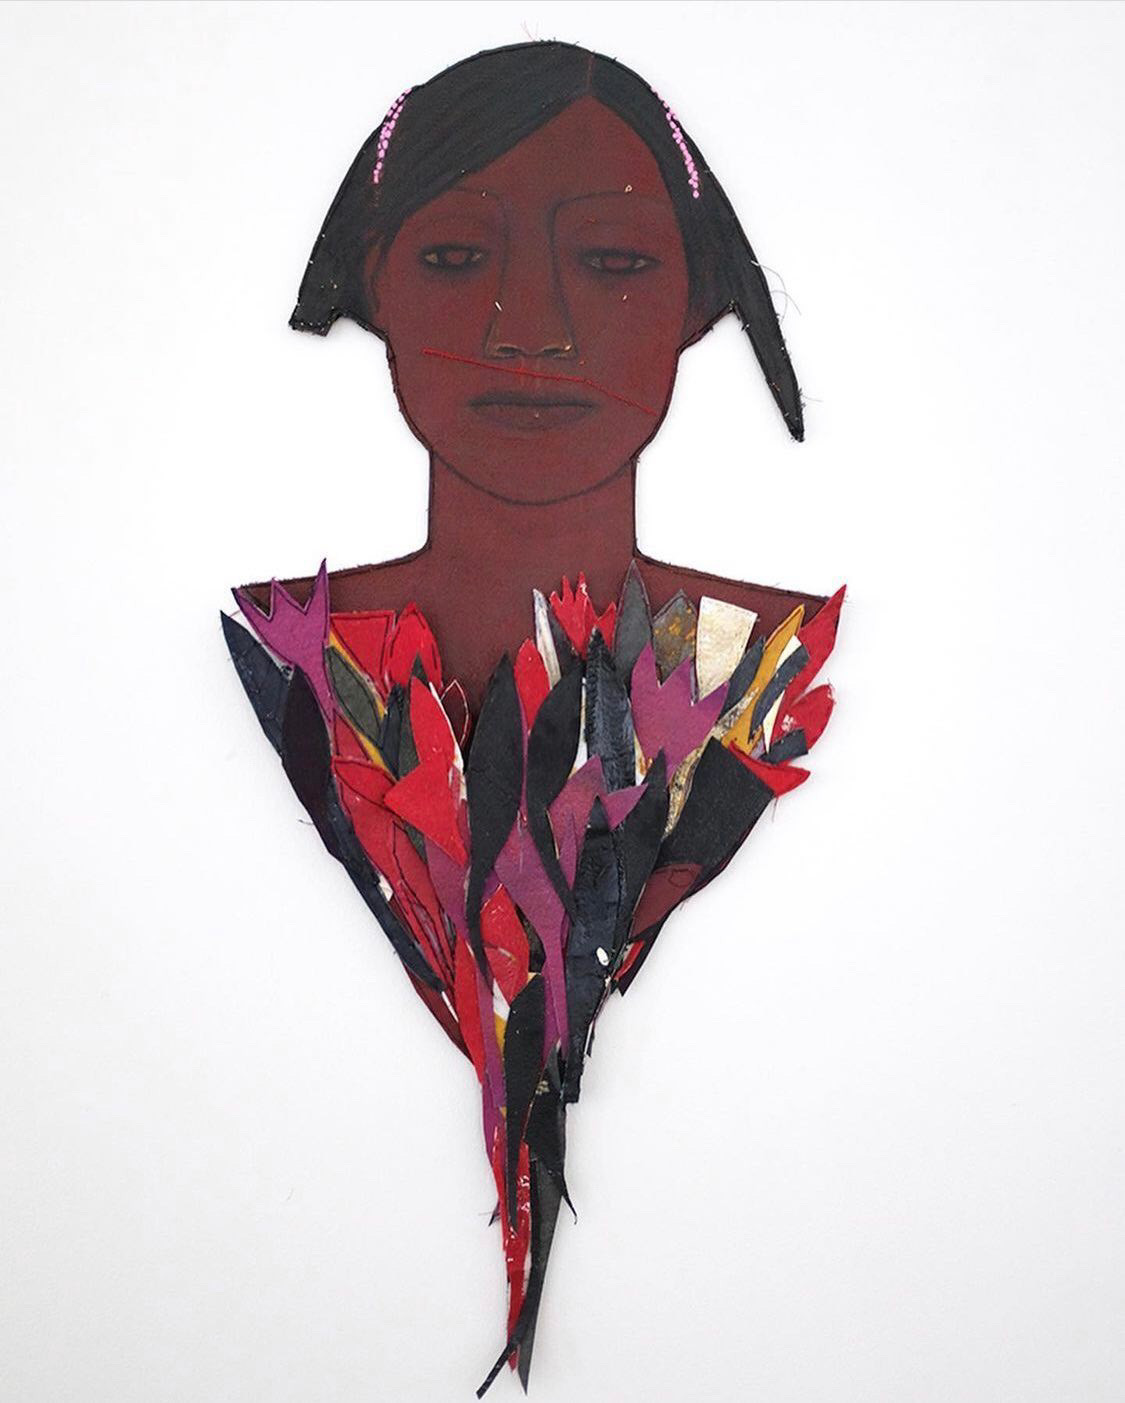 Alicia Henry (b. 1966), Untitled Figure with Flowers, ca. 2020. Dye acrylic, fabric, thread, and paper. 35 x 16 in. Collection of Sasha and Charlie Sealy © Alicia Henry, 2023